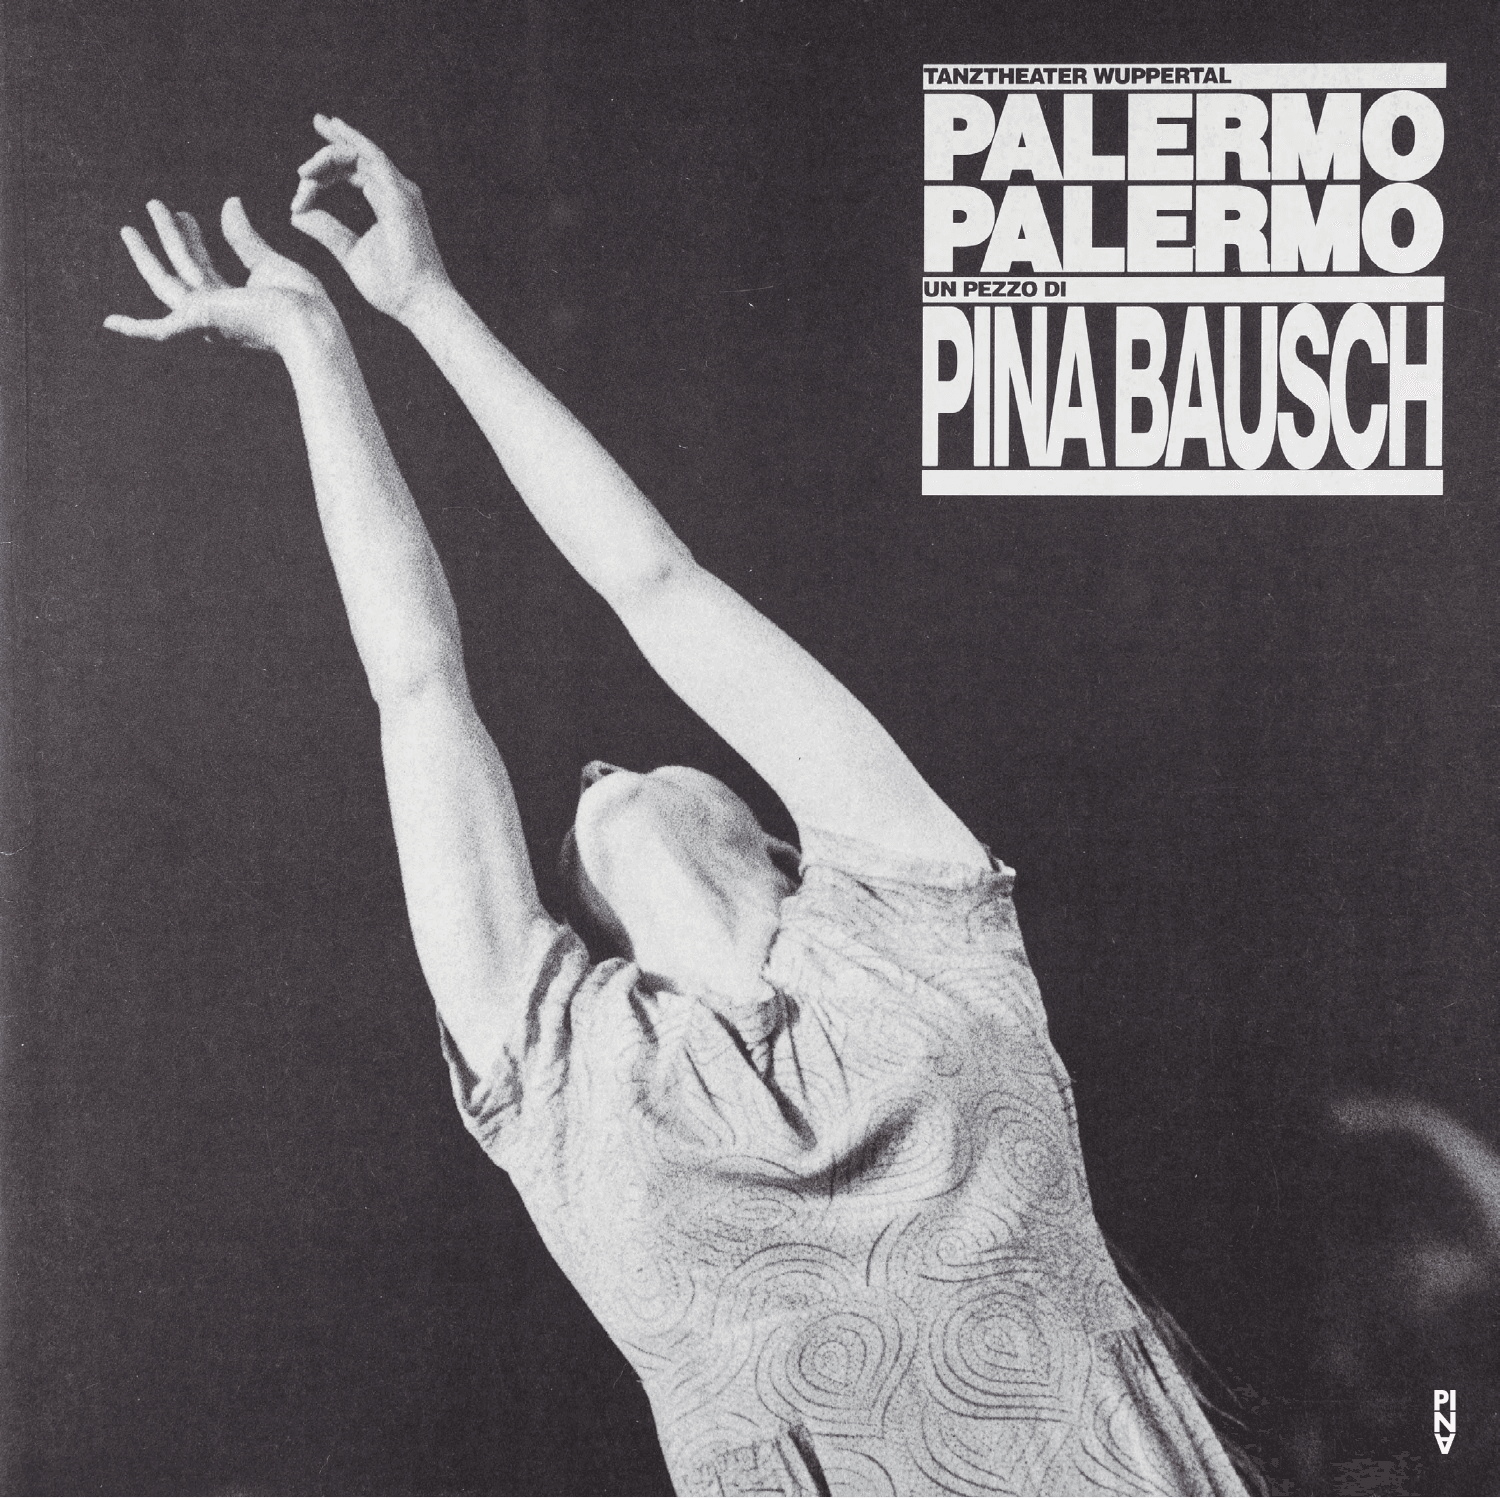 Booklet for “Palermo Palermo” by Pina Bausch with Tanztheater Wuppertal in in Milan, 10/04/1990 – 10/07/1990